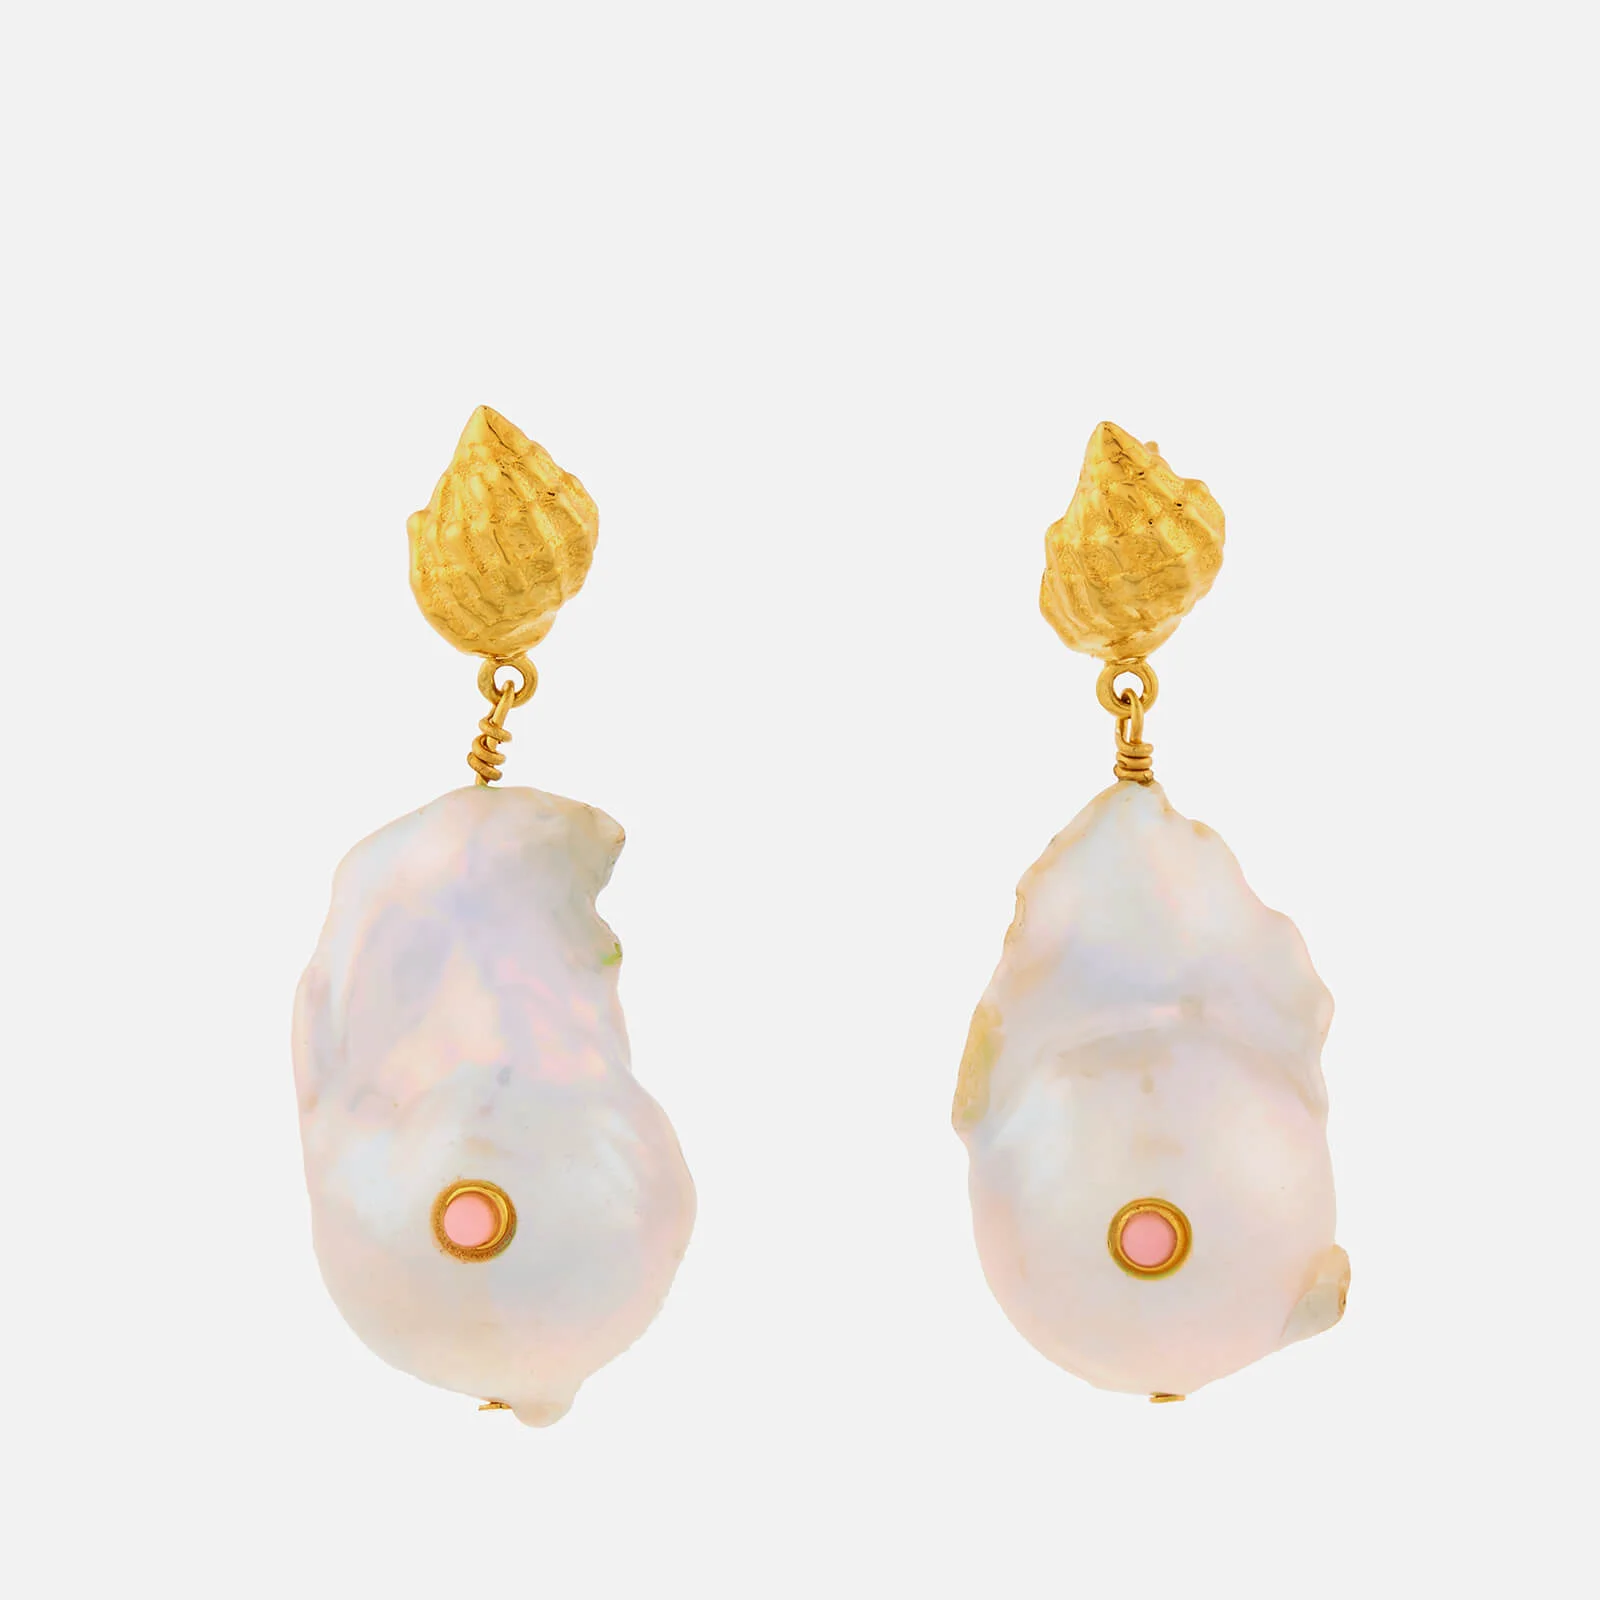 Anni Lu Women's Baroque Pearl Shell Earrings - Coral Image 1